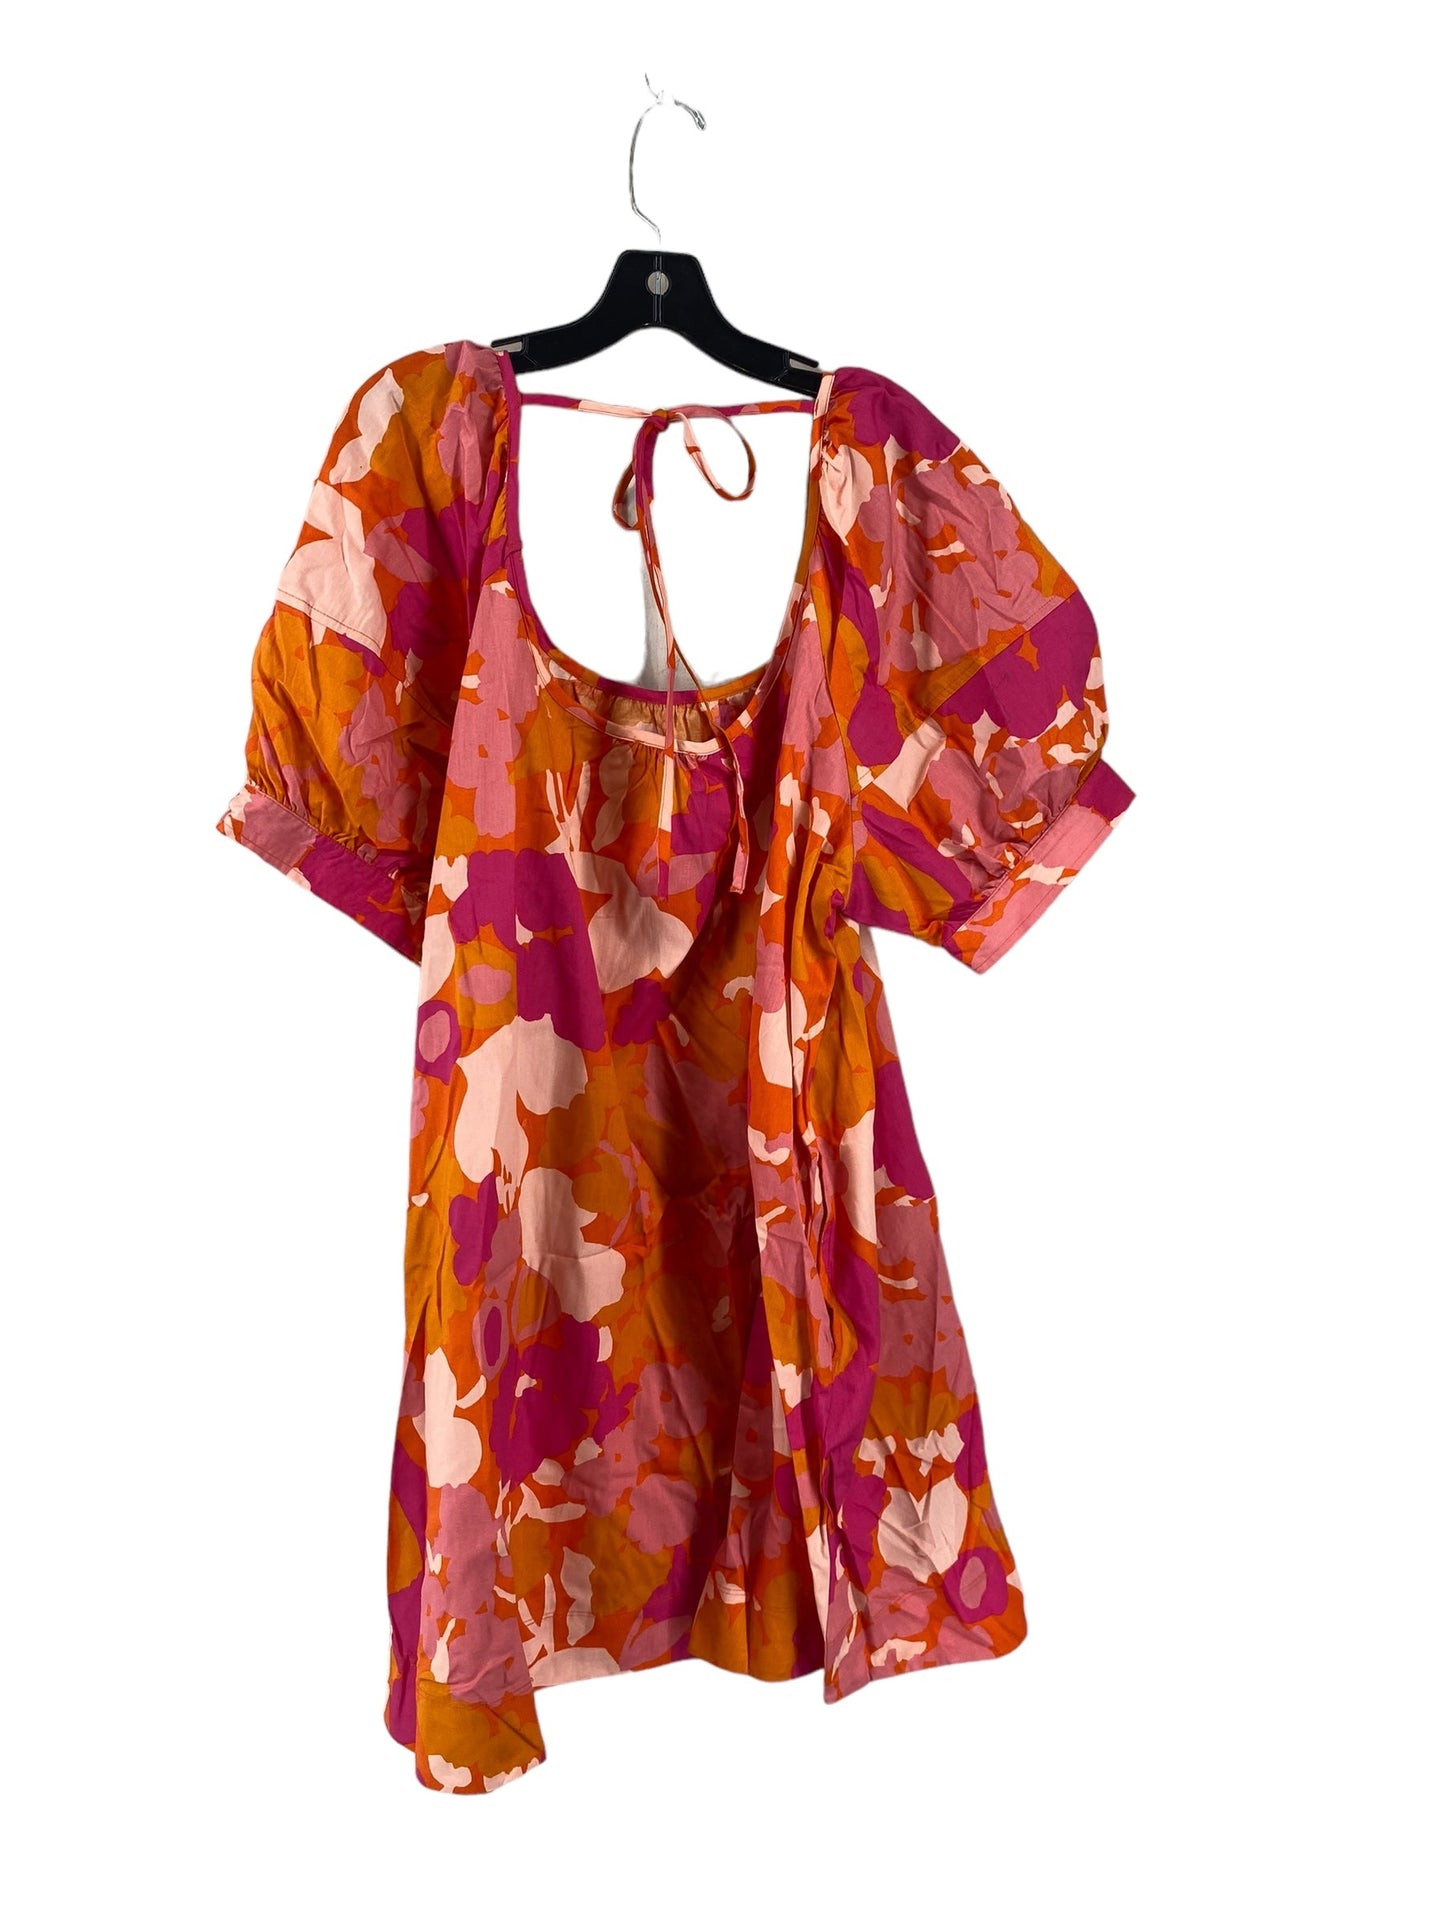 Floral Print Dress Casual Short Free Assembly, Size Xl